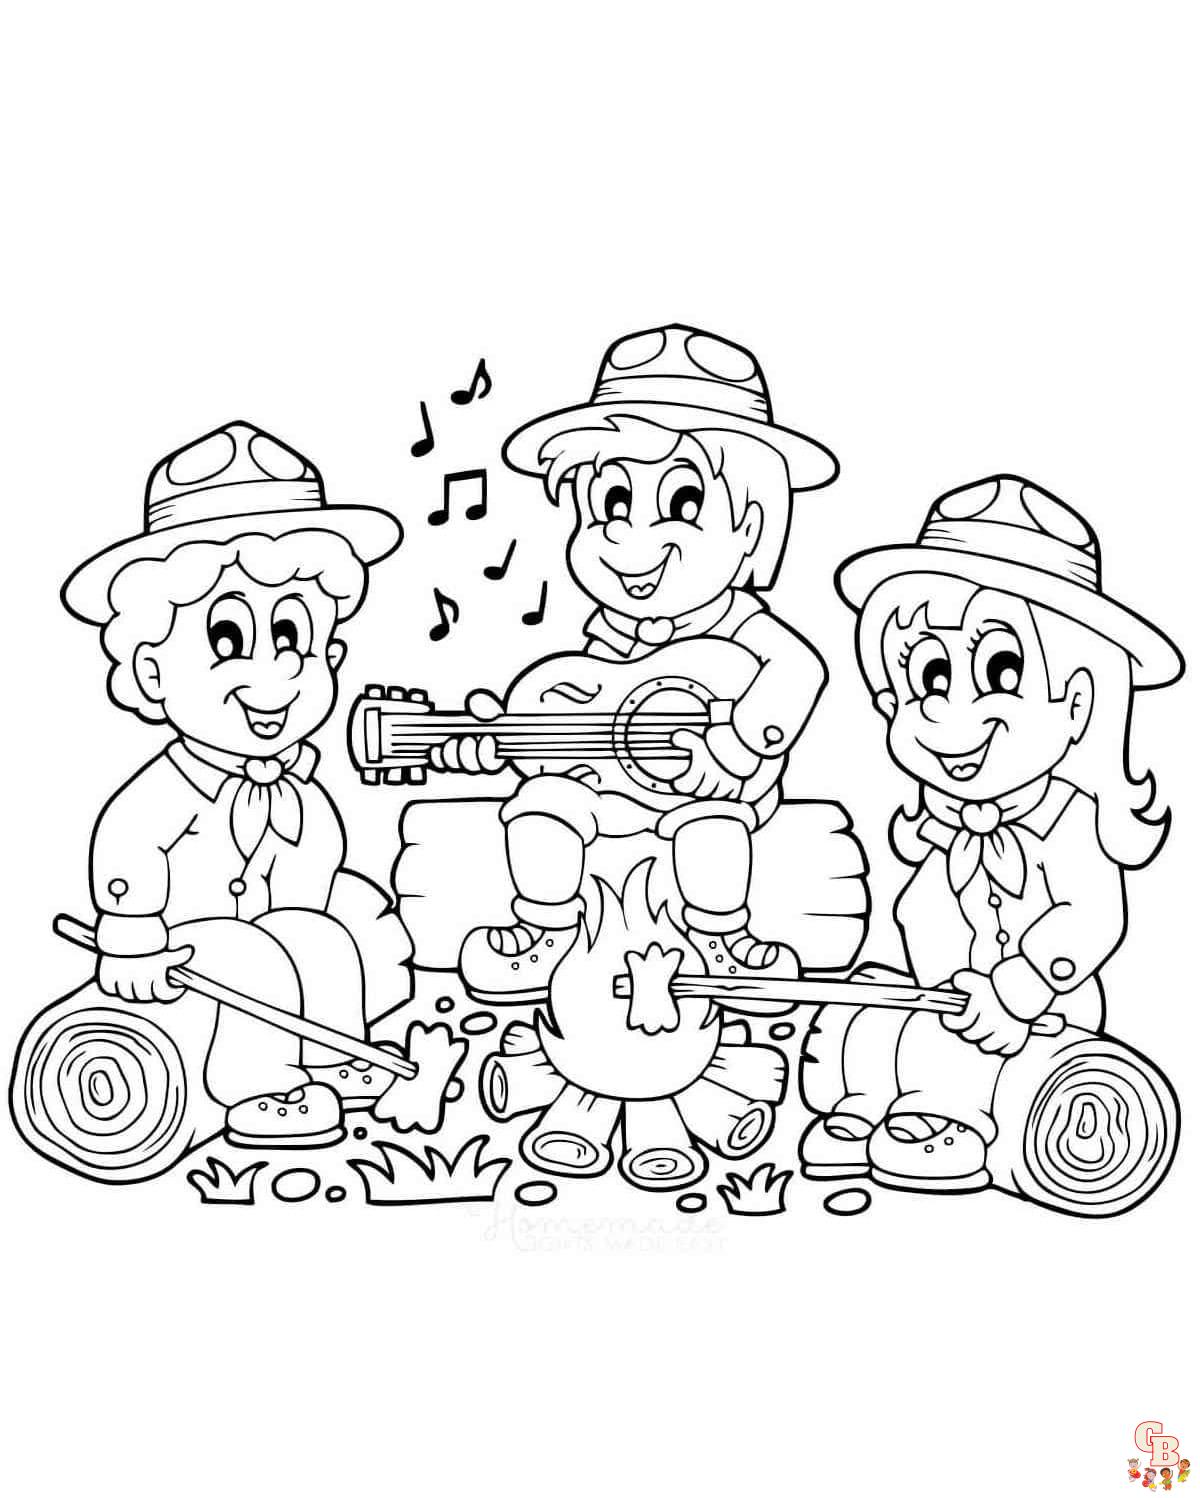 Cub Scout coloring pages free